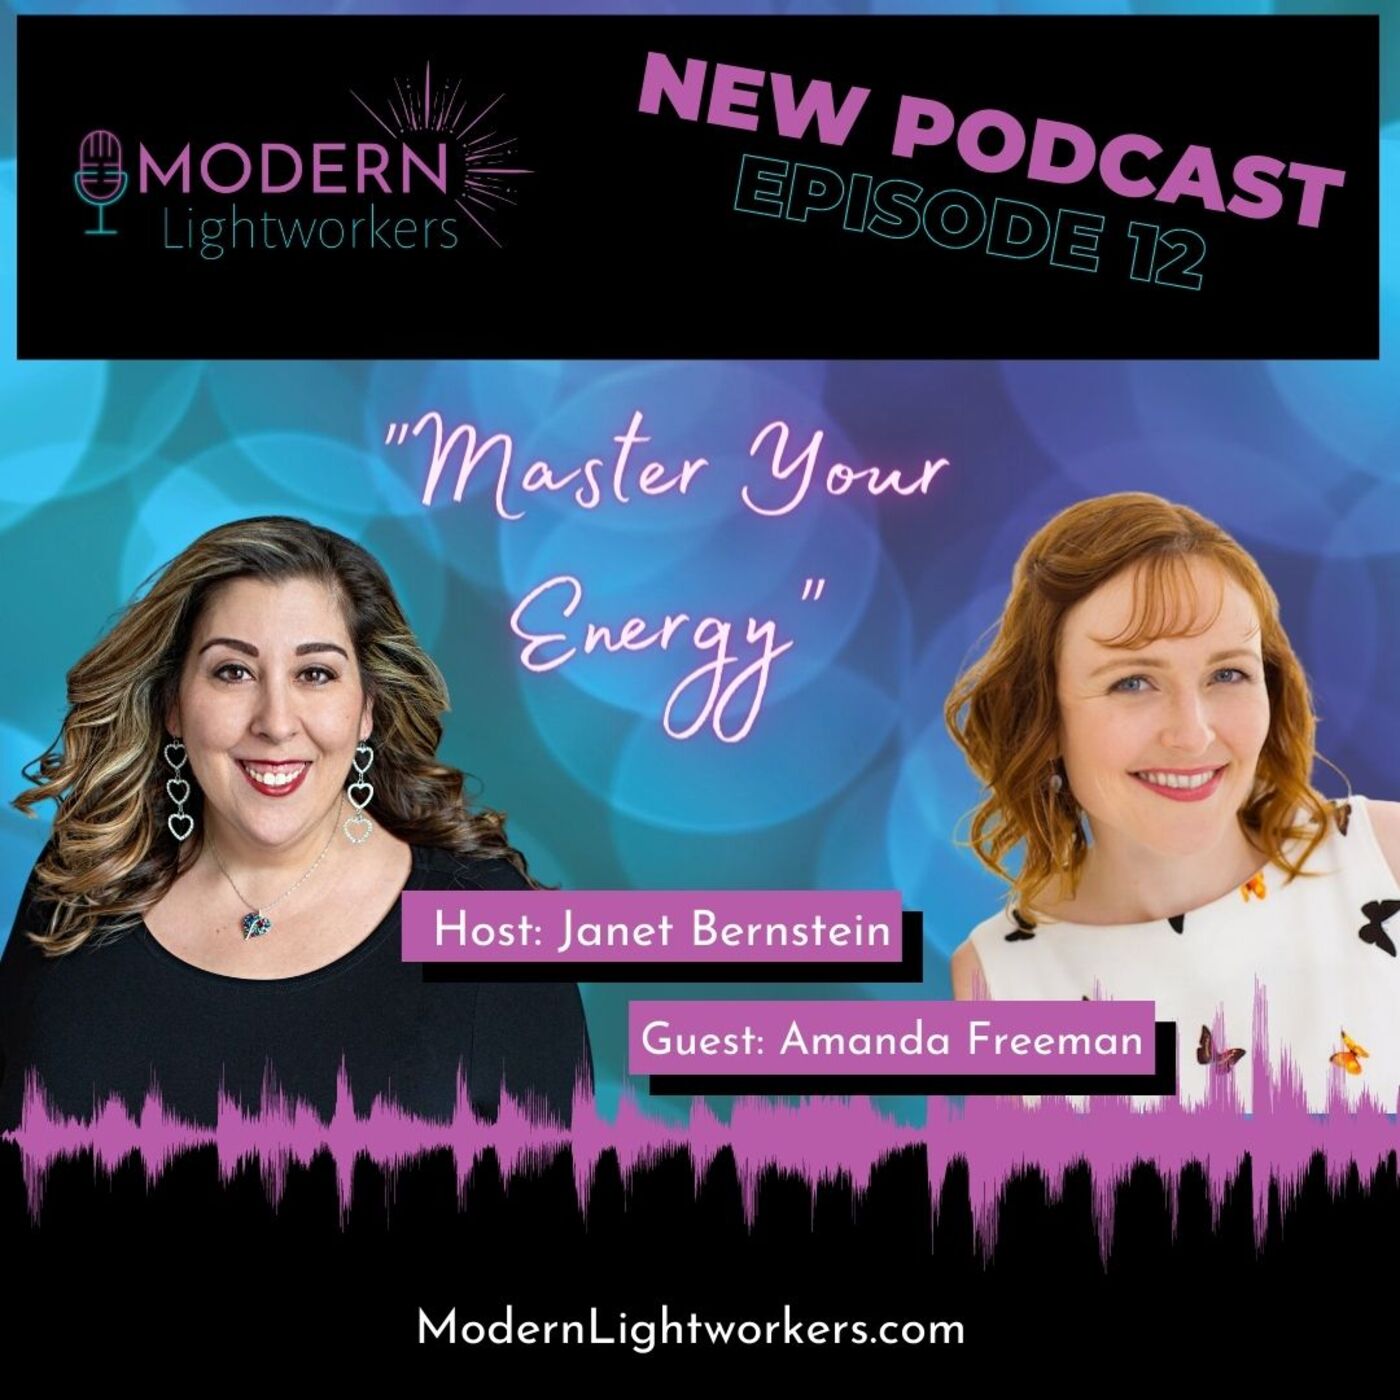 Modern Lightworkers Episode 12: Master Your Energy